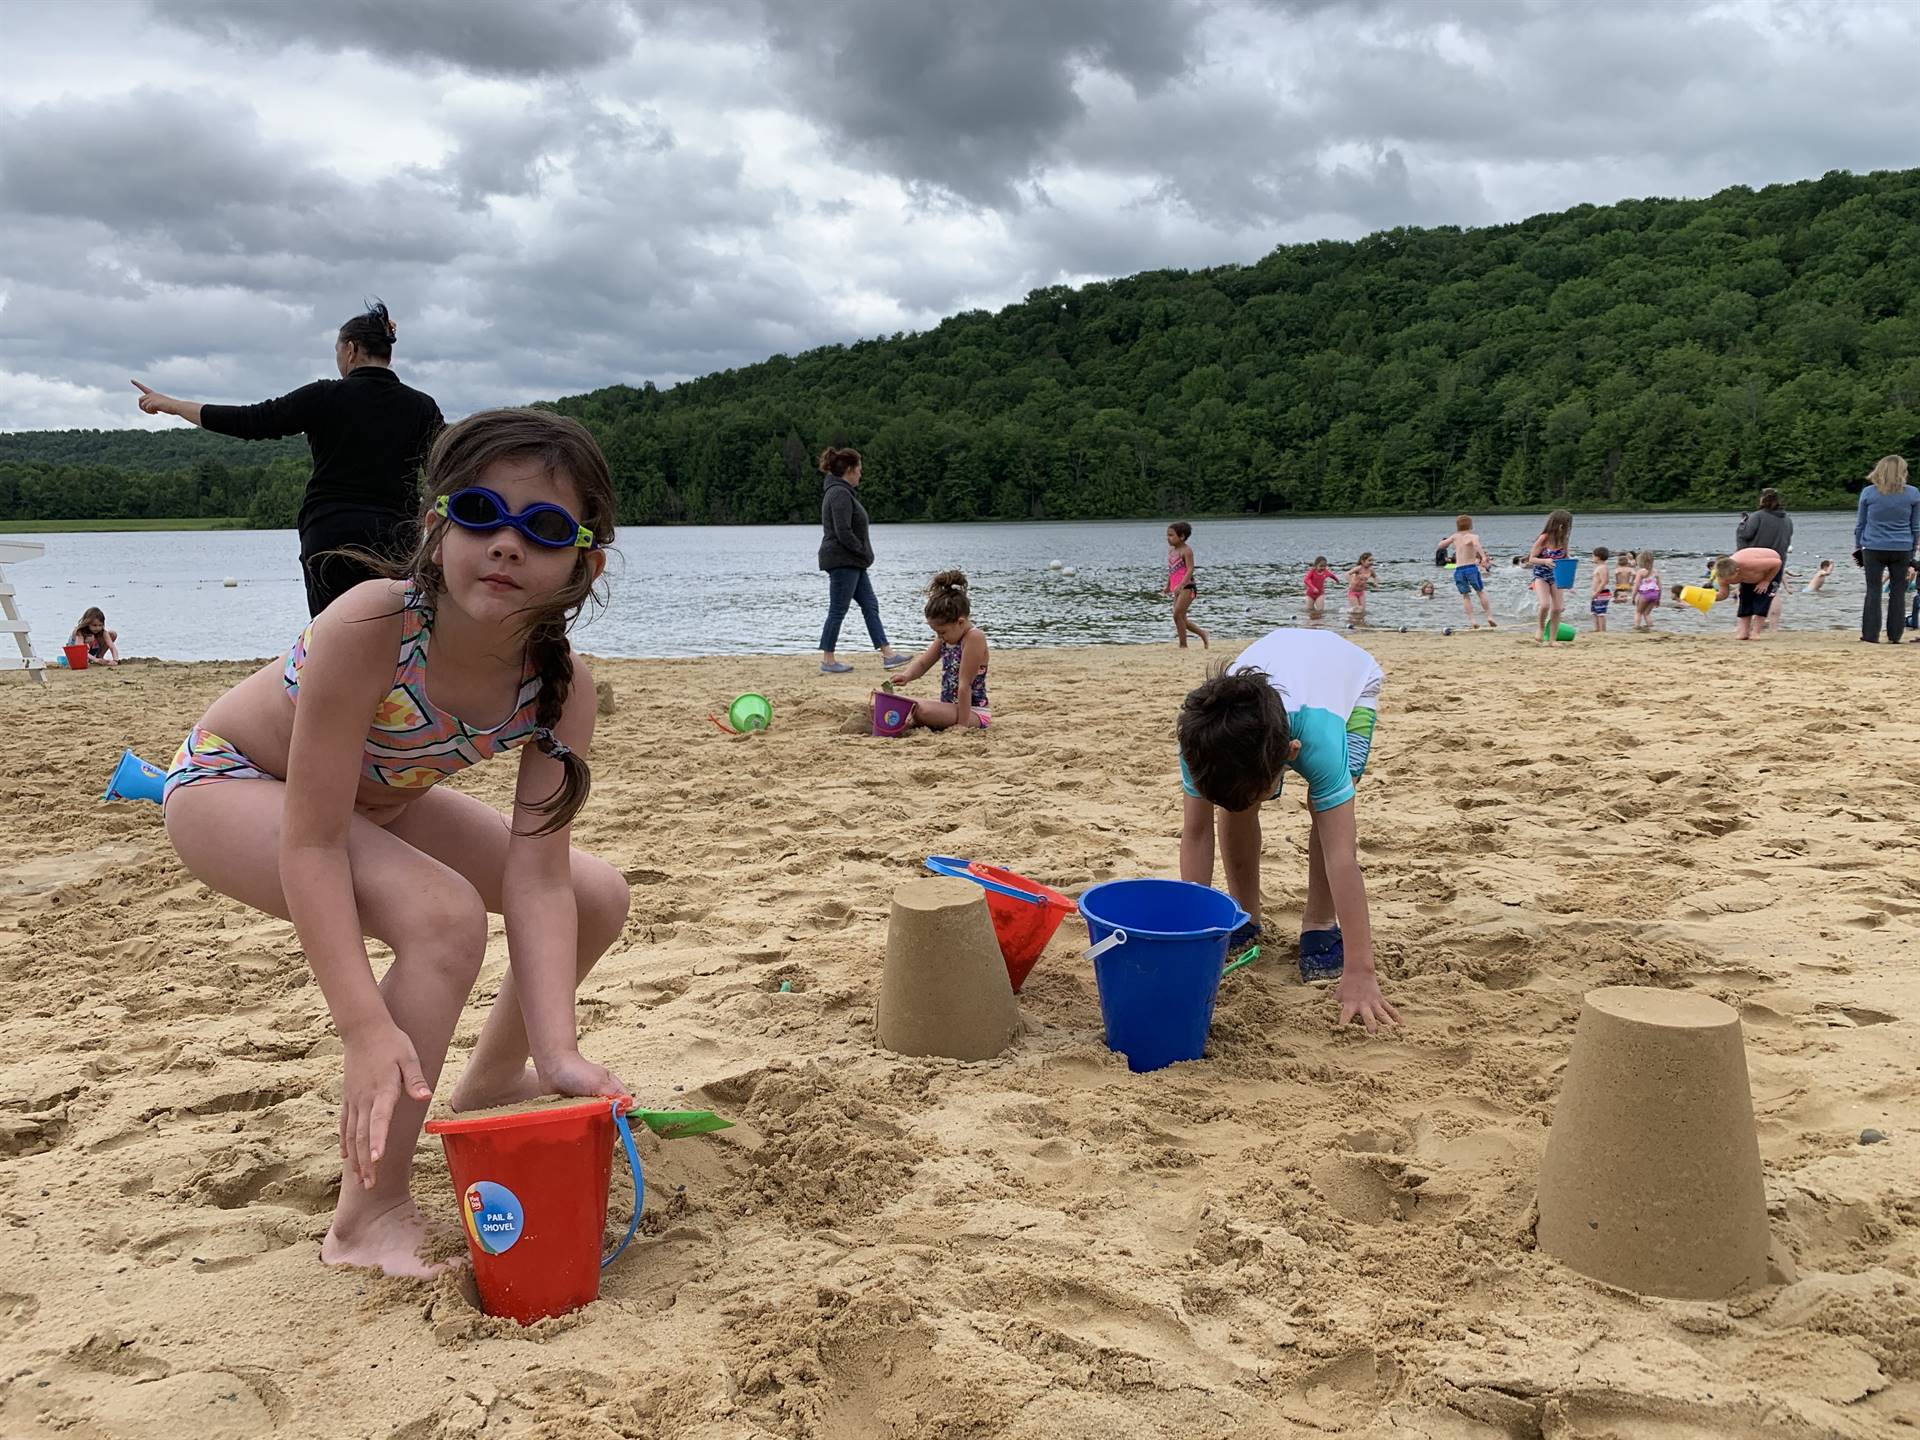 students build sand castles in sand.